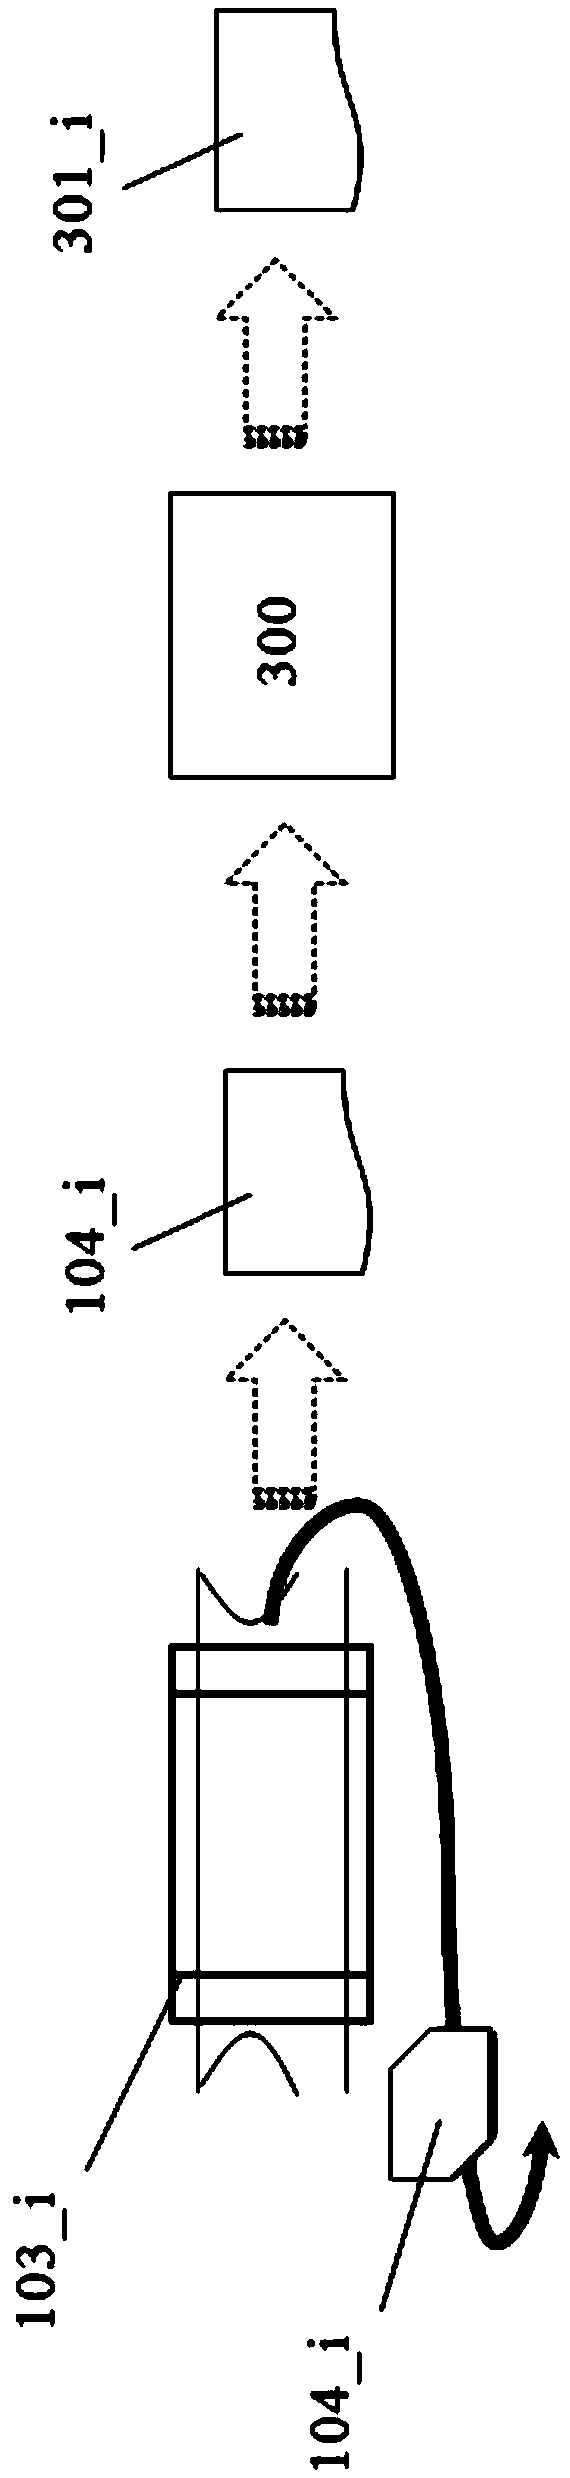 Device and method arranged for executing information processing on a data stream